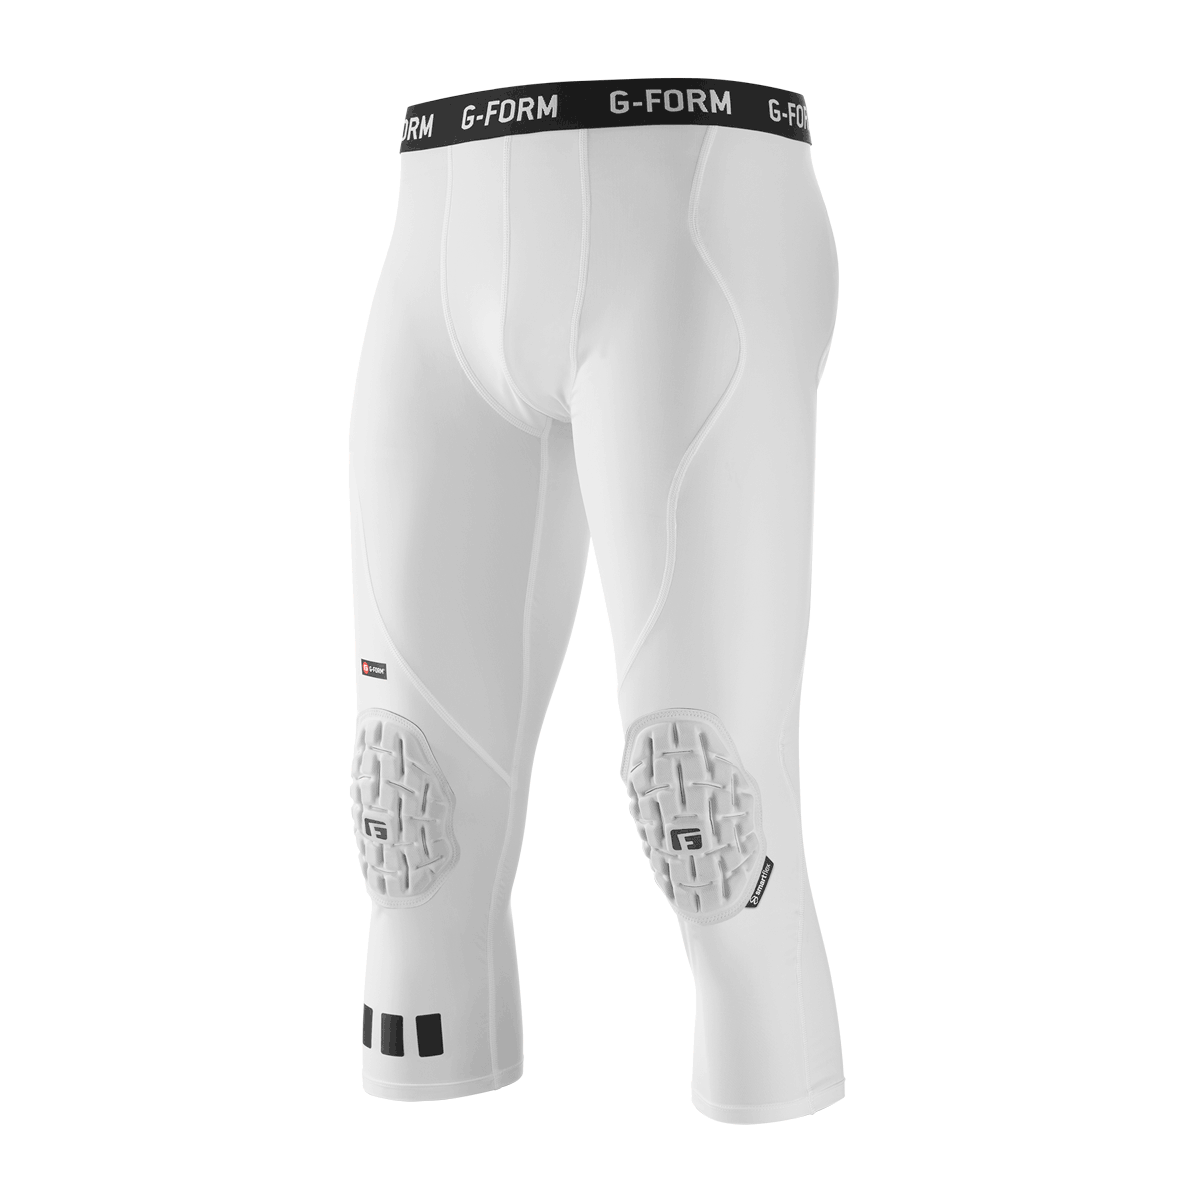 7808 3/4 Length Pro Combat Compression pants Tights for basketball